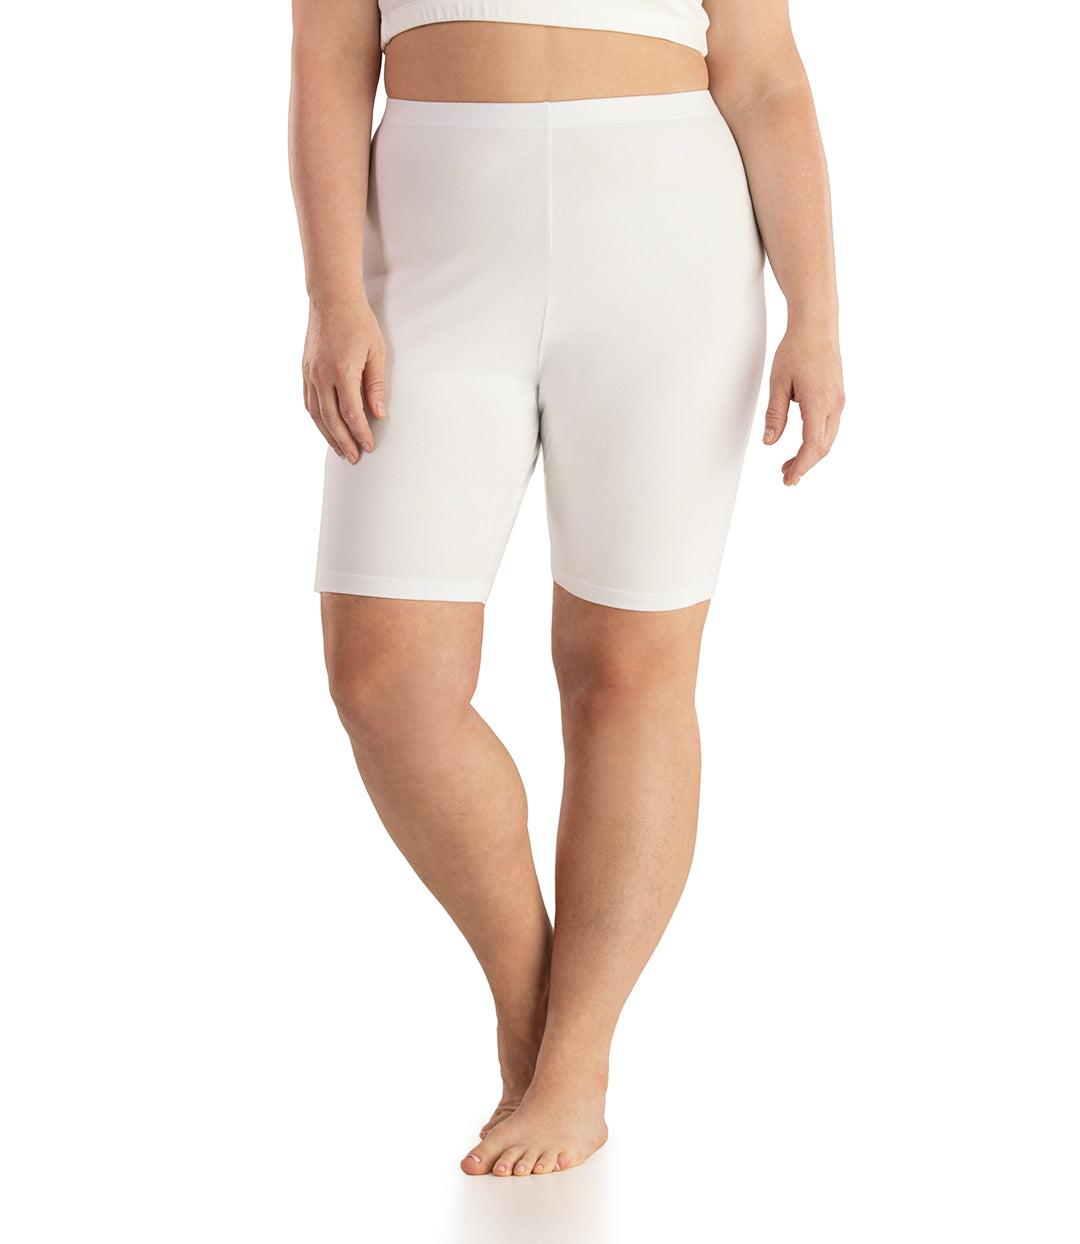 Bottom half of plus sized woman, front view, wearing JunoActive Stretch Naturals Bike Shorts in color white. Bottom hem is a few inches above the knee. 